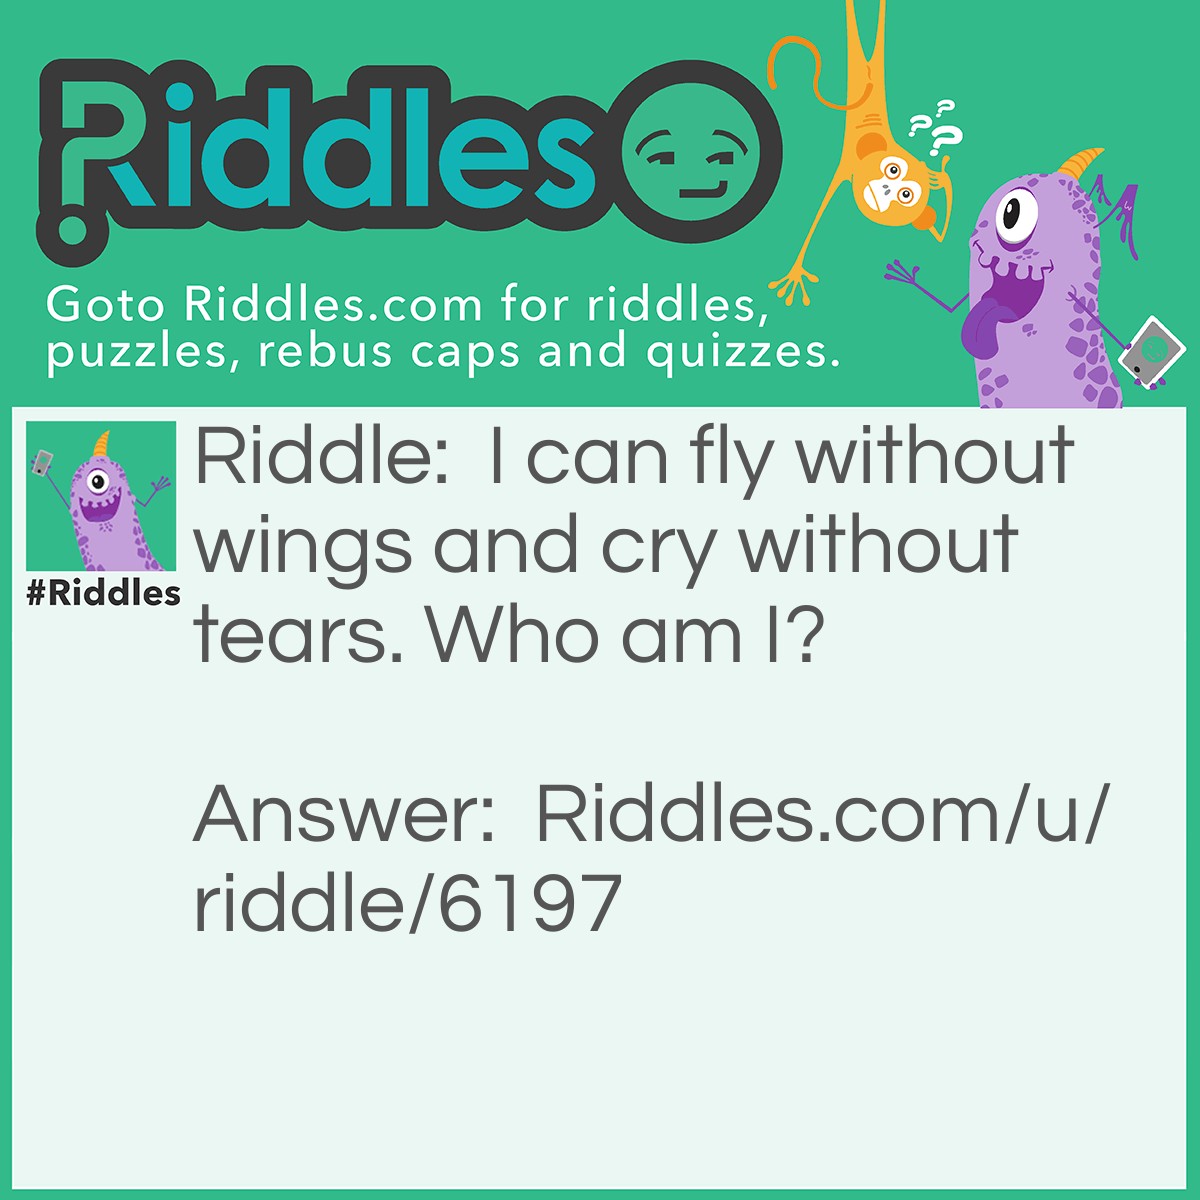 Riddle: I can fly without wings and cry without tears. Who am I? Answer: A cloud.